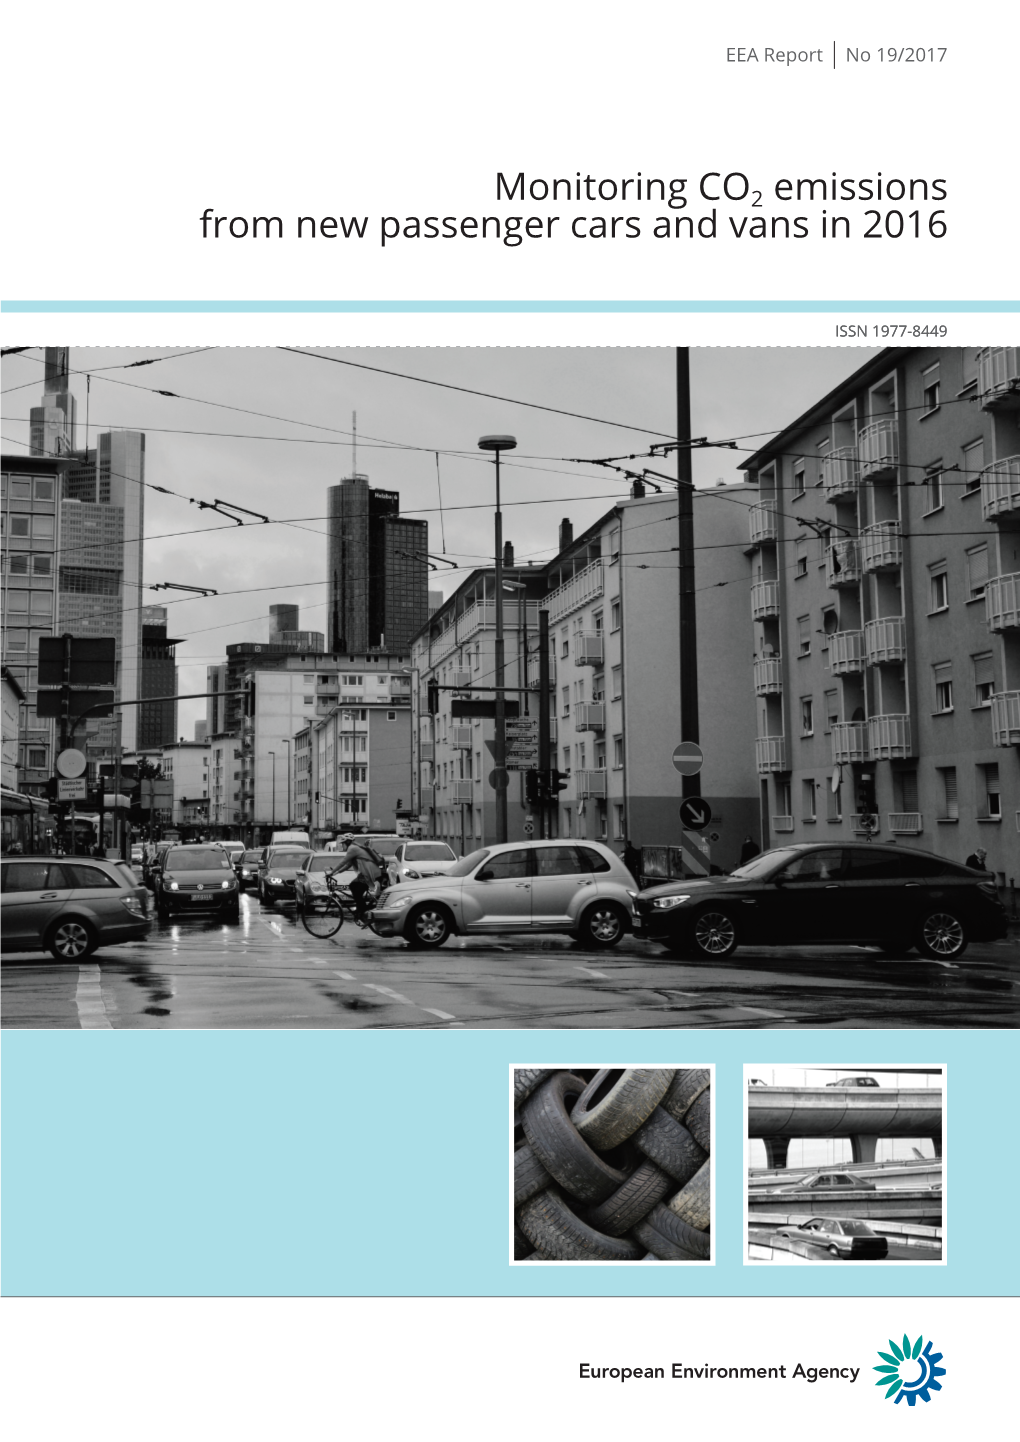 Monitoring CO2 Emissions from Passenger Cars and Vans in 2015